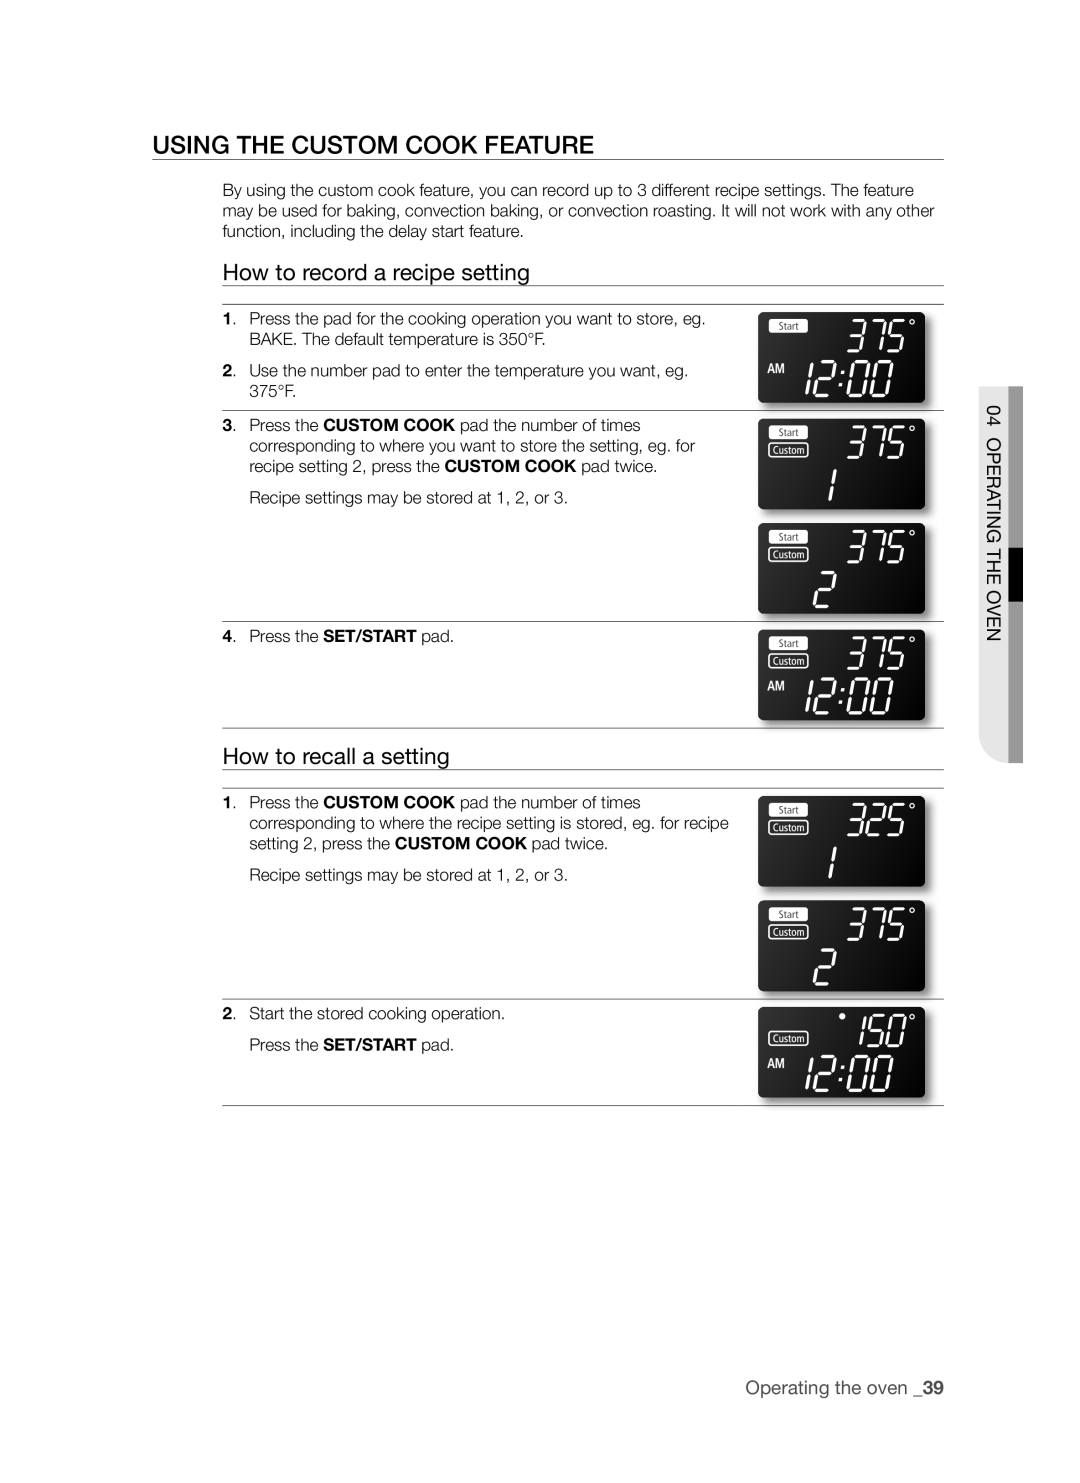 Samsung FE-R500WW user manual Using the custom cook feature, How to record a recipe setting, How to recall a setting 